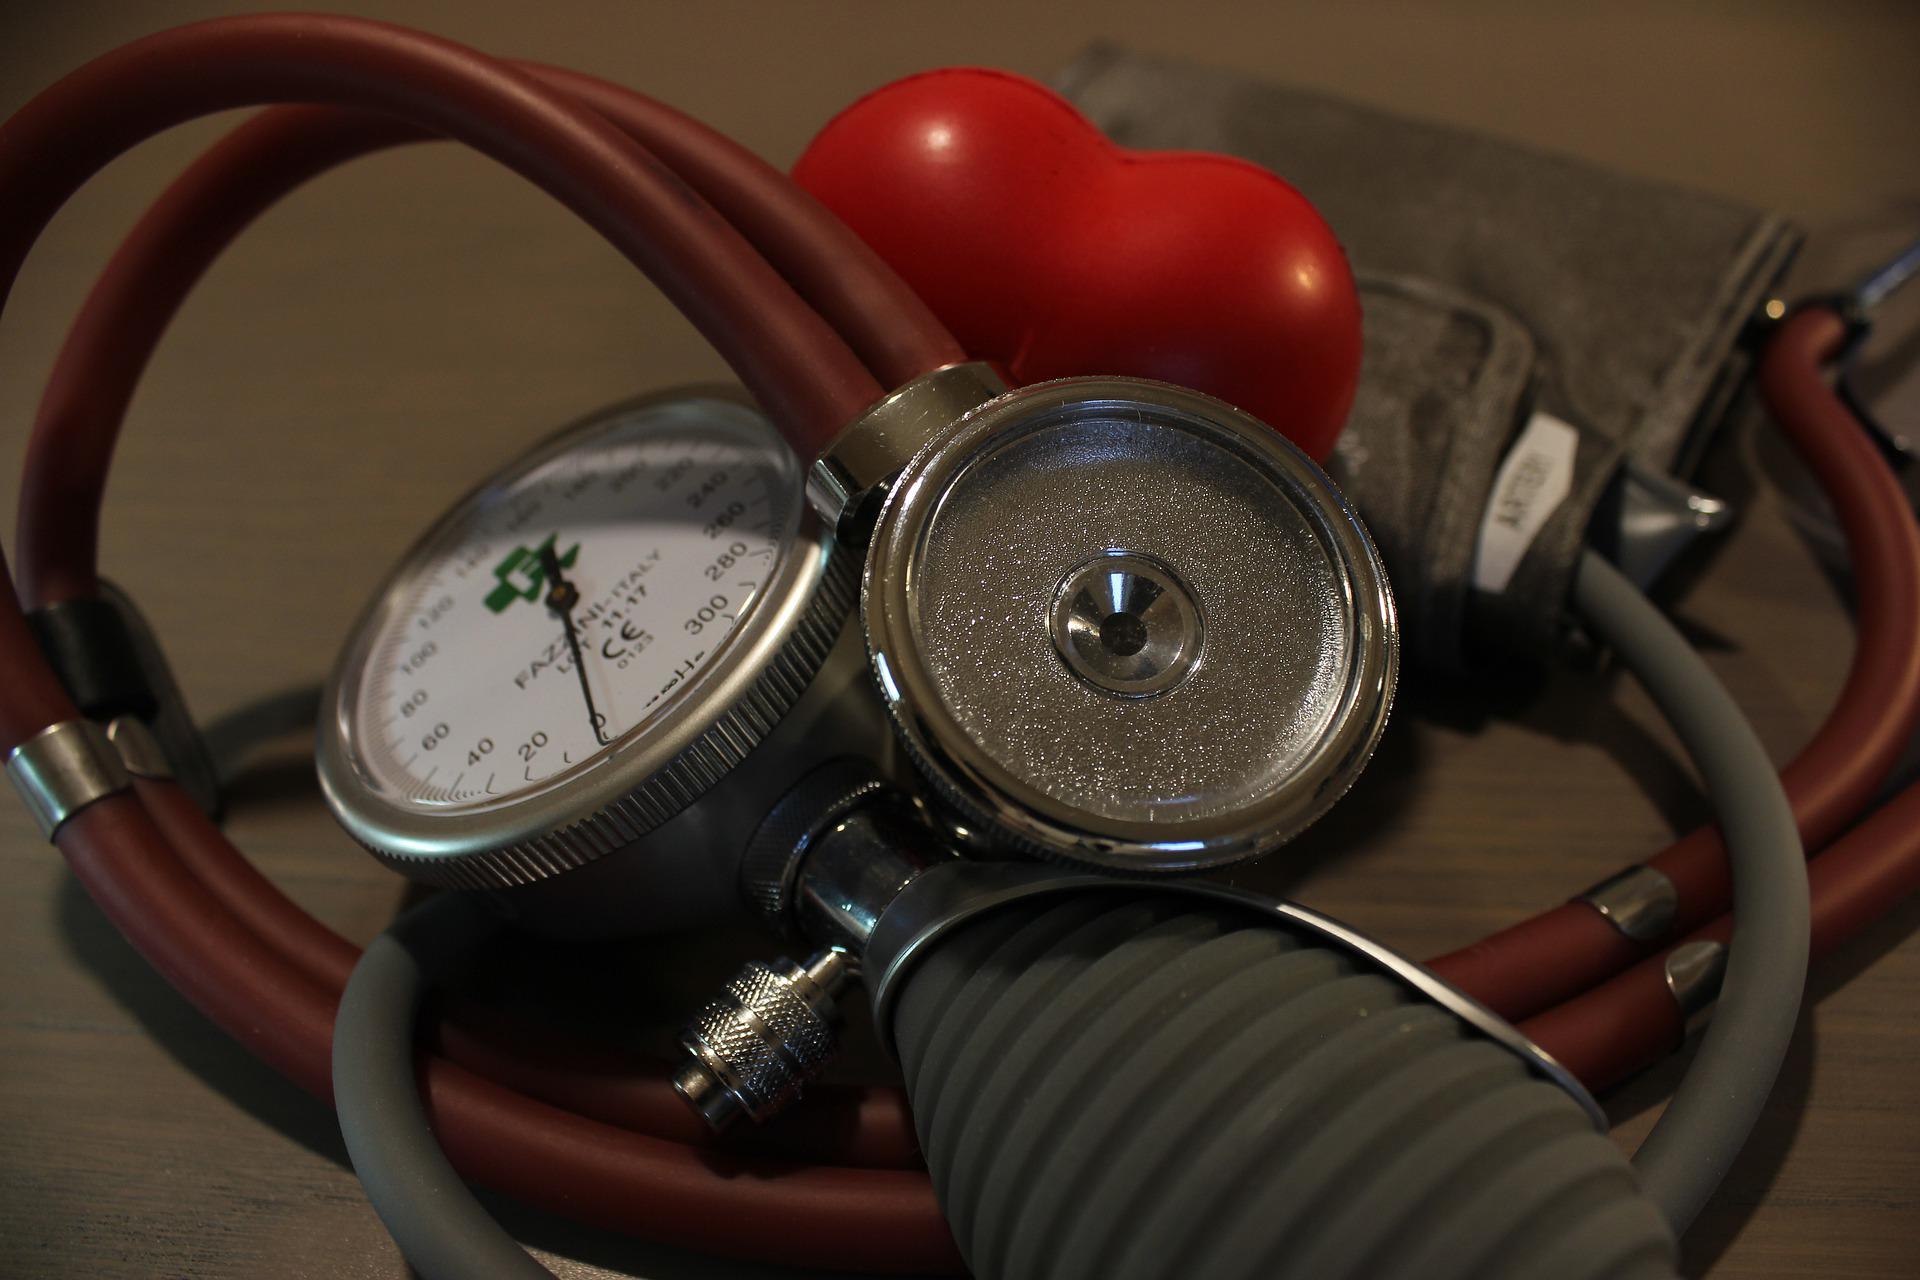 Blood pressure, how its lack of control and lack of regulation makes it a real silent killer